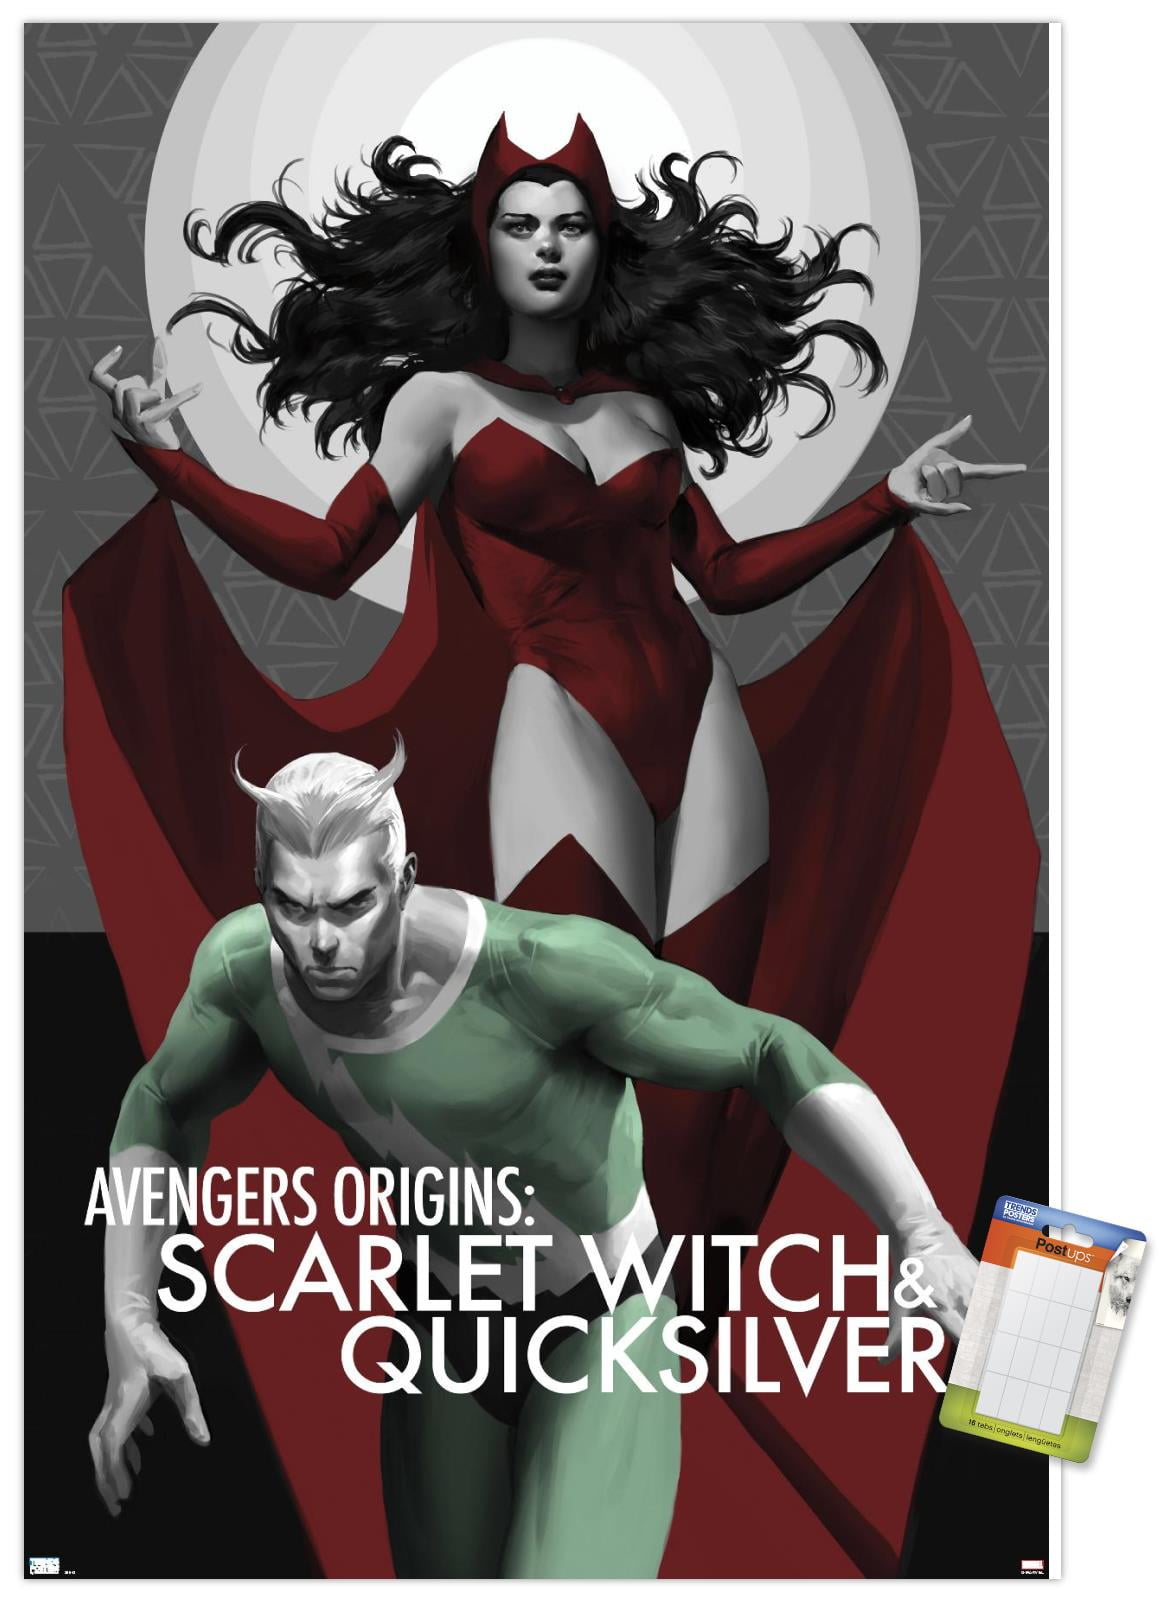 Empire's Guide To The Scarlet Witch and Quicksilver.